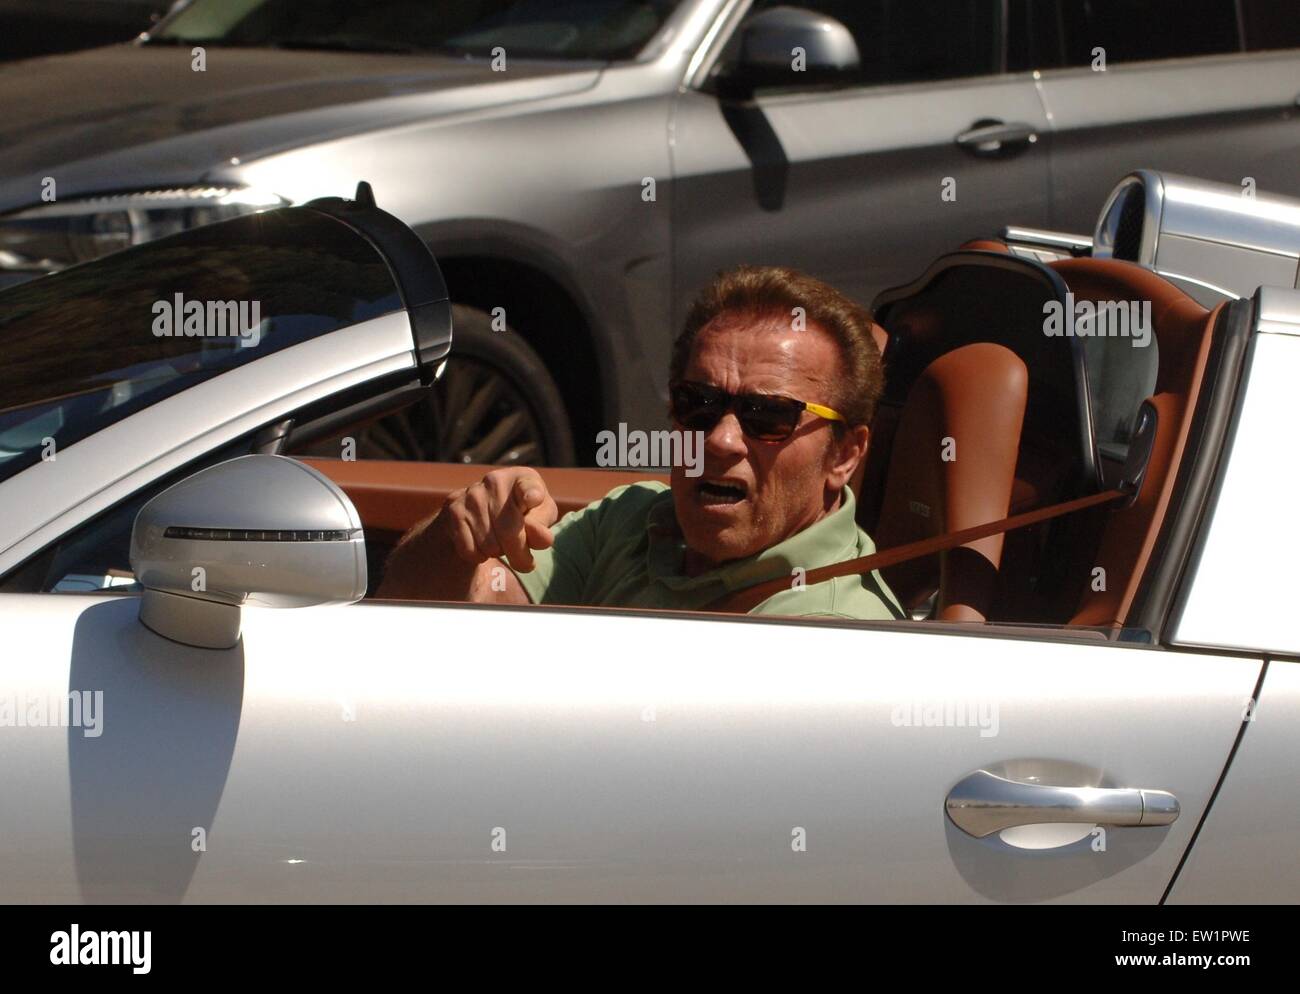 Arnold Schwarzenegger spotted out and about in Beverly Hills  Featuring: Arnold Schwarzenegger Where: Los Angeles, California, United States When: 04 Apr 2015 C Stock Photo